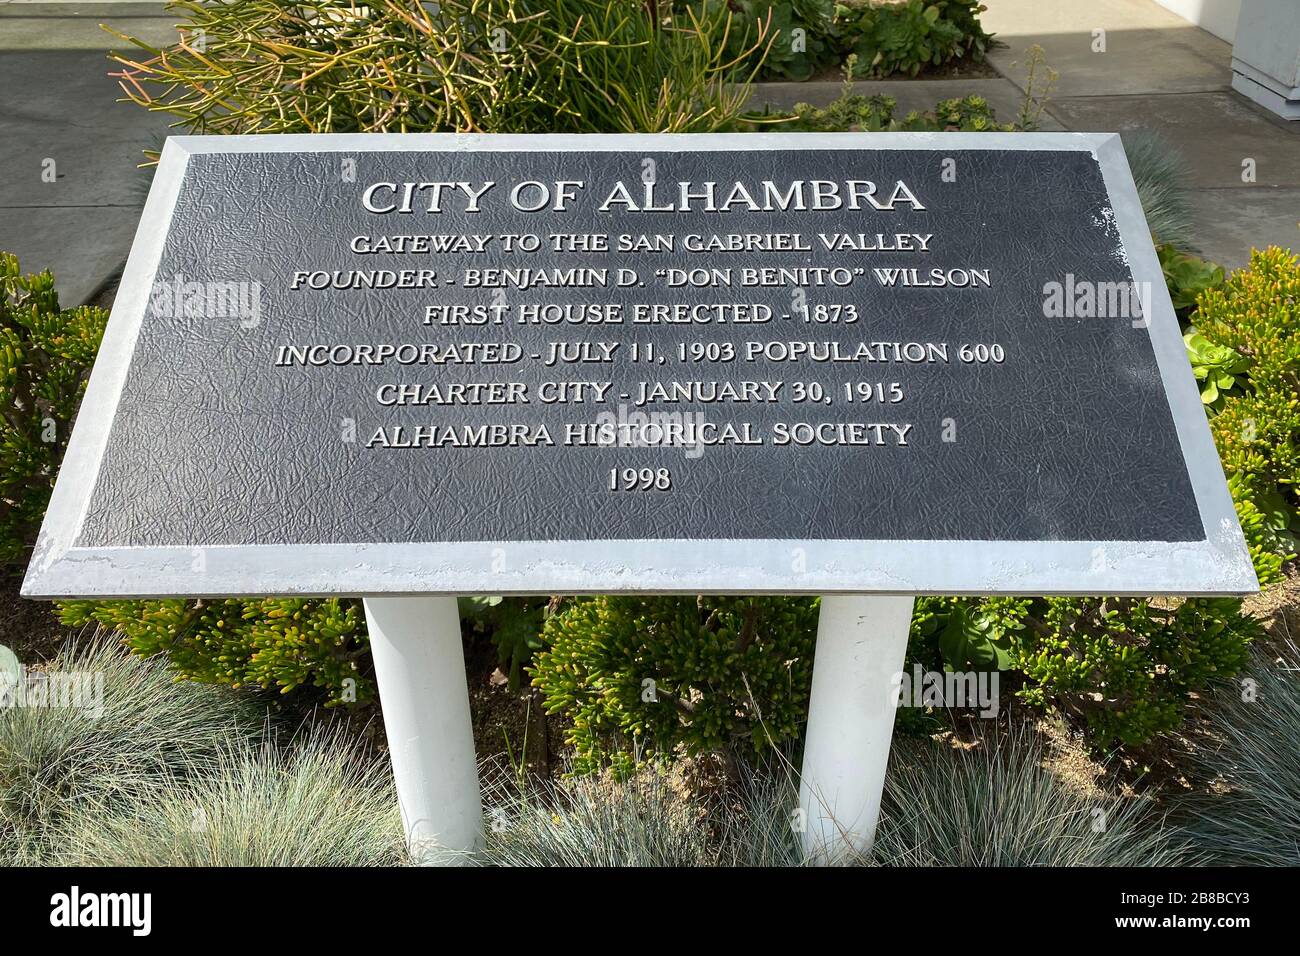 General overall view of Alhambra City Hall historical landmark sign in the wake of coronavirus COVID-19 pandemic outbreak, Friday, March 20, 2020, in Alhambra, California, USA. (Photo by IOS/Espa-Images) Stock Photo